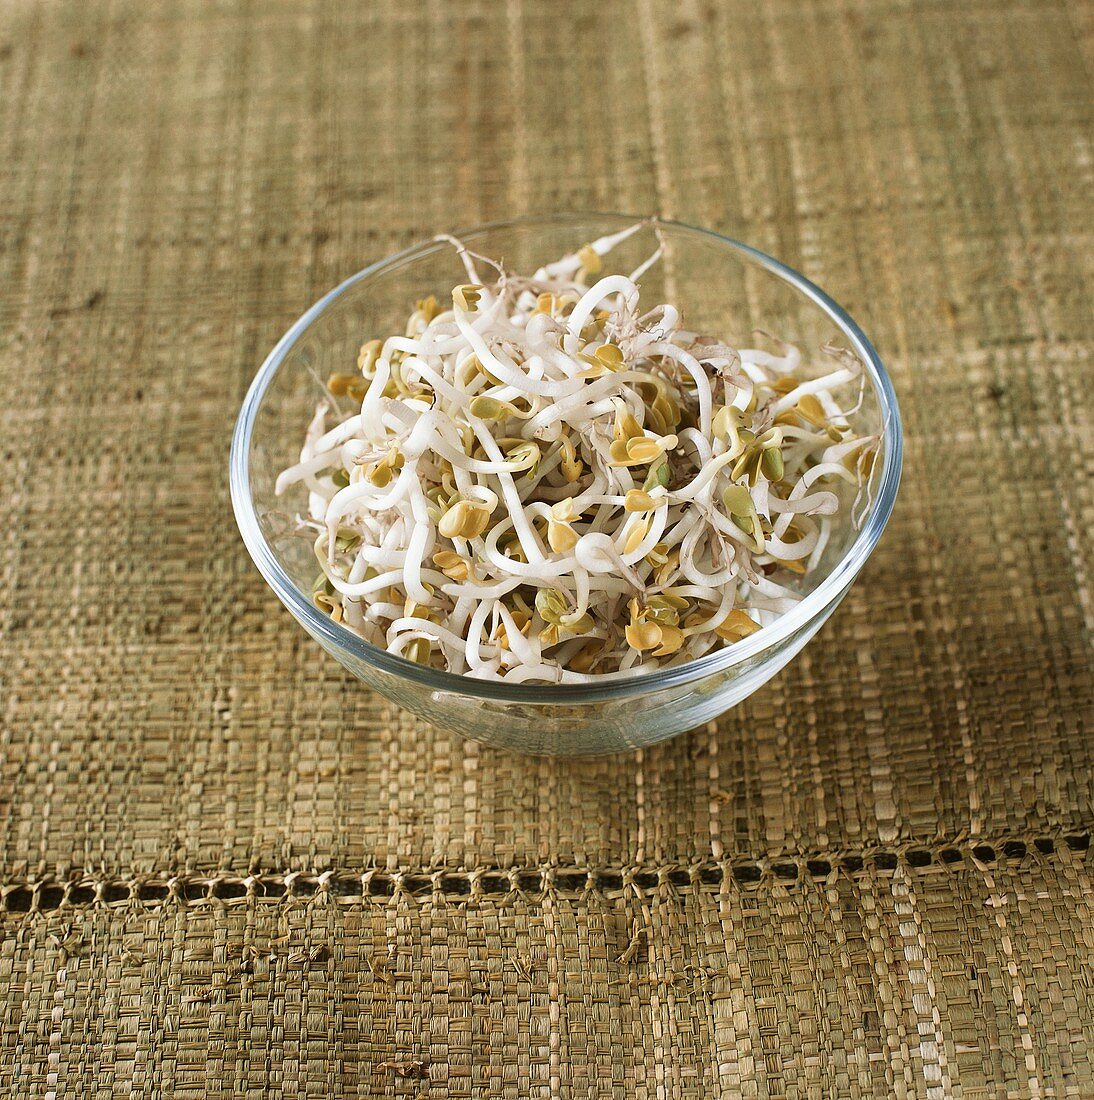 Sprouts in a small bowl